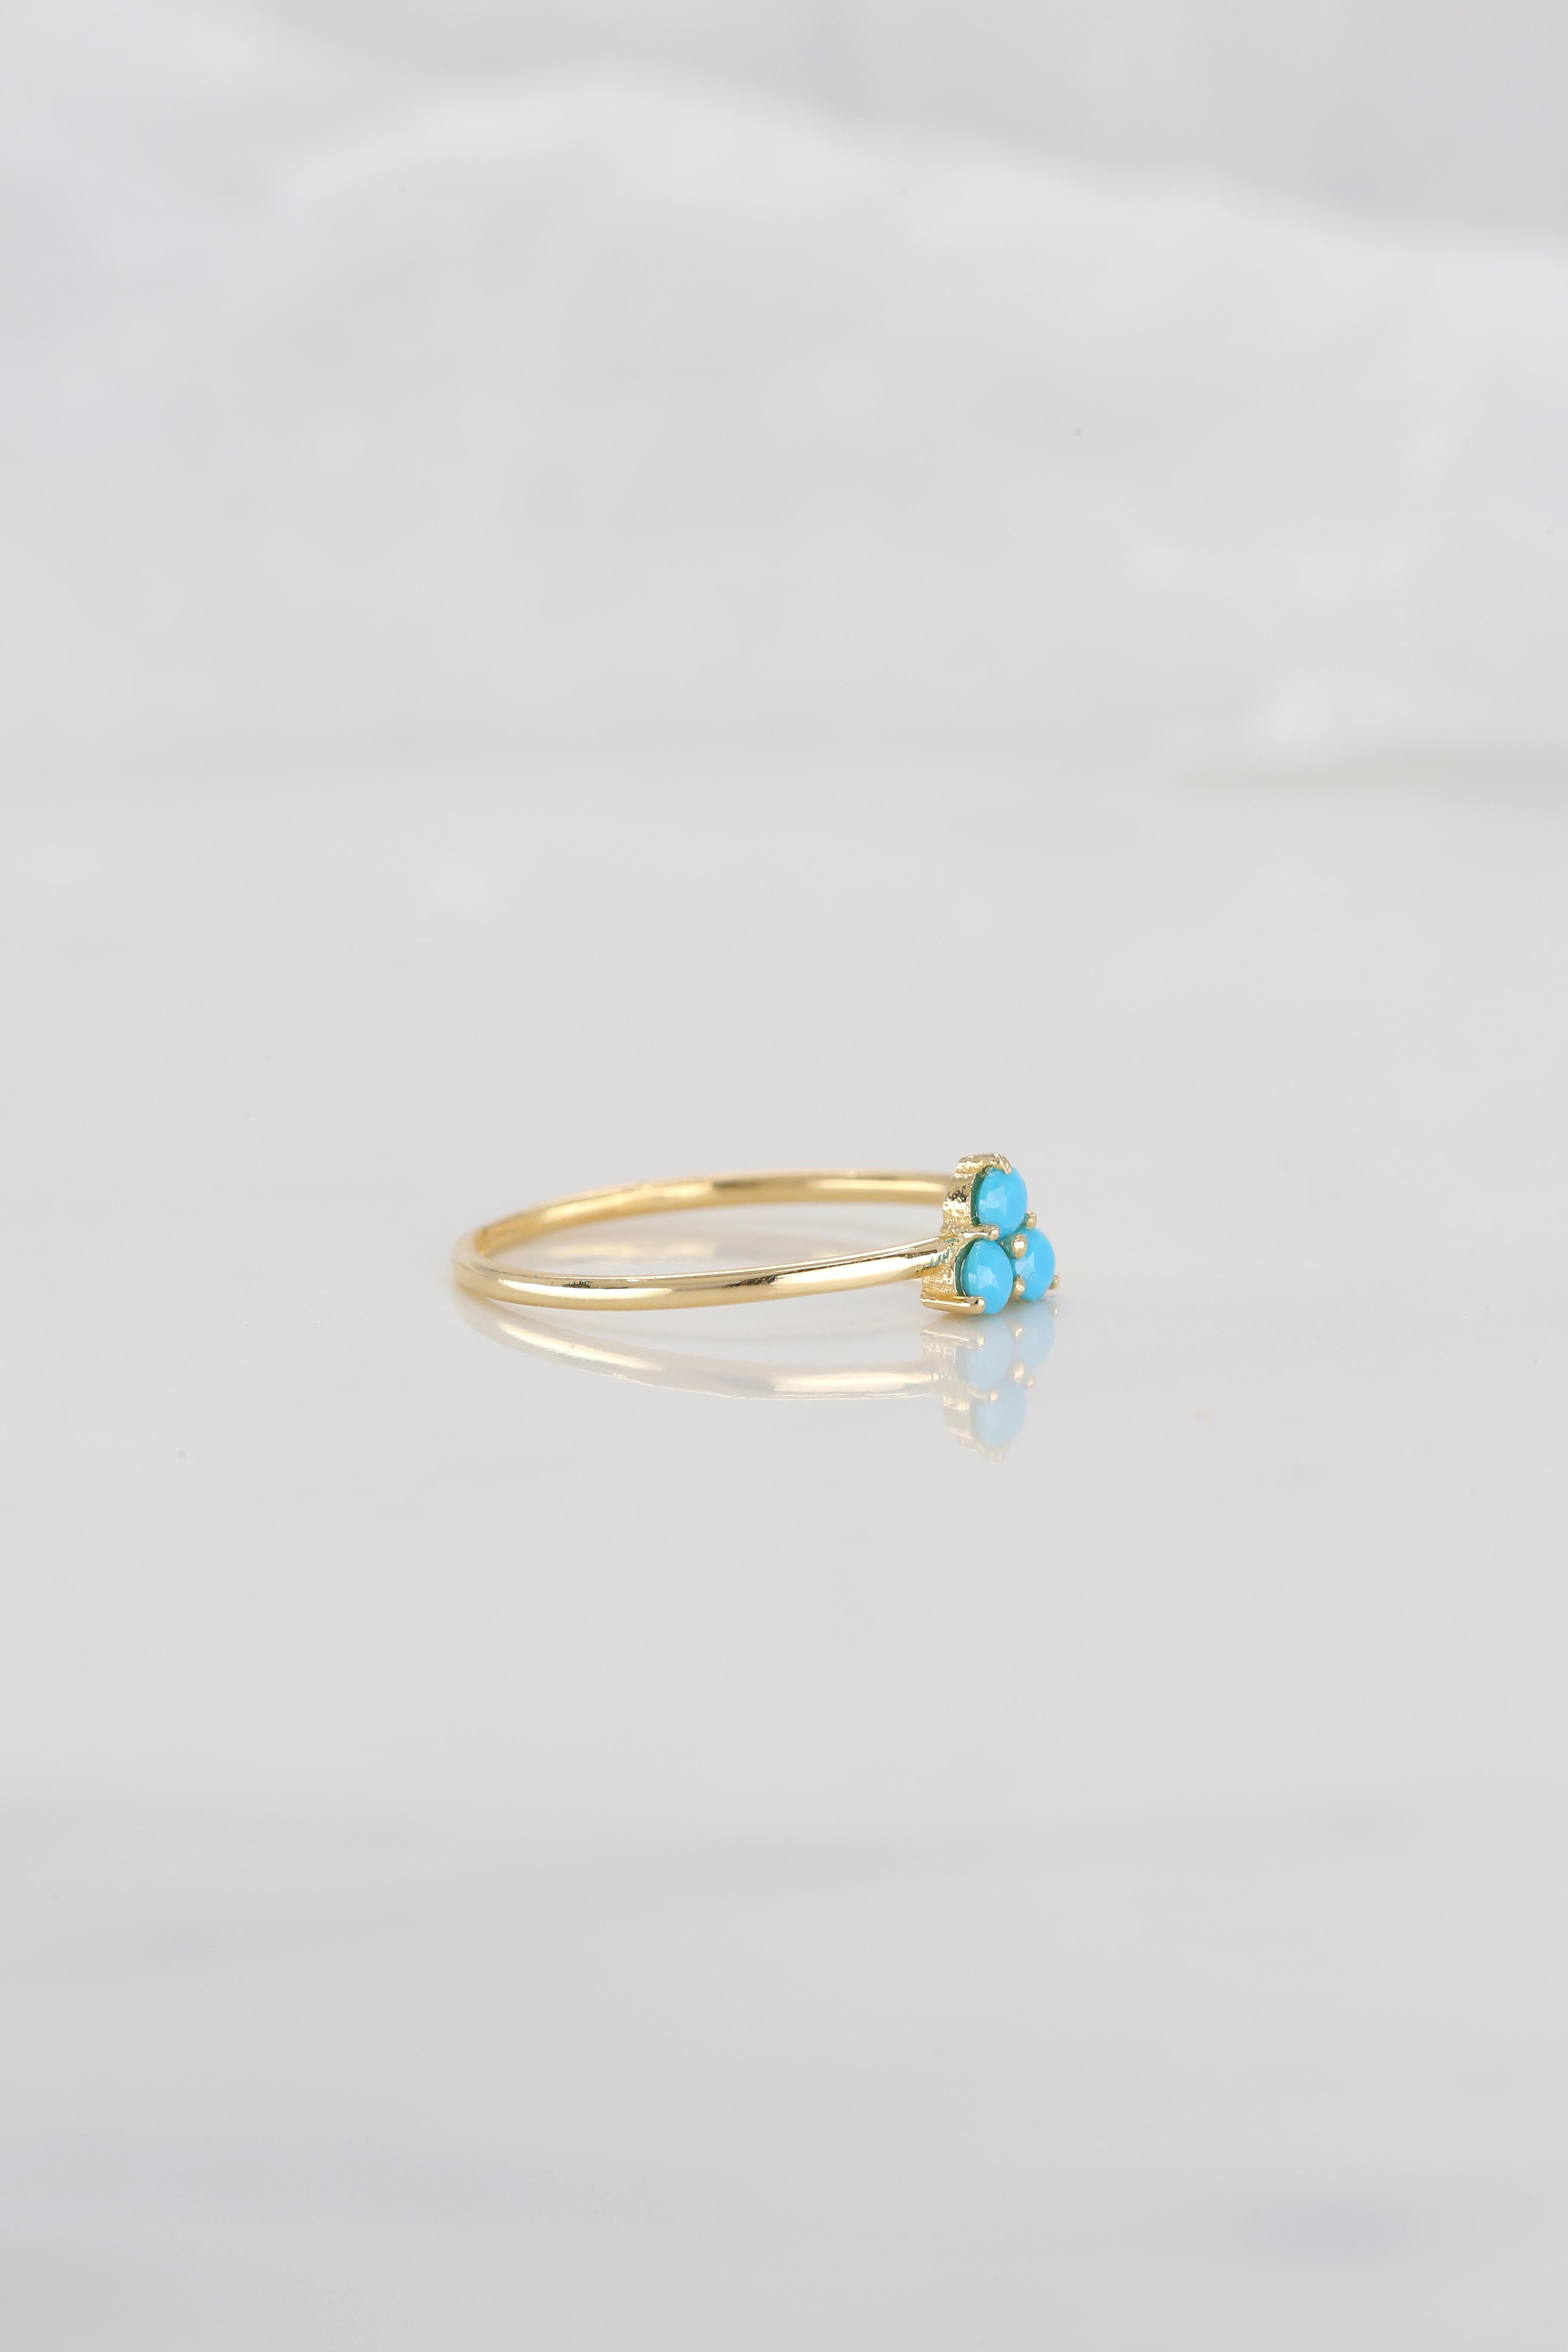 For Sale:  Dainty Turquoise Ring, 14K Dainty Gold Turquoise Ring, Gold Turquoise Ring 7